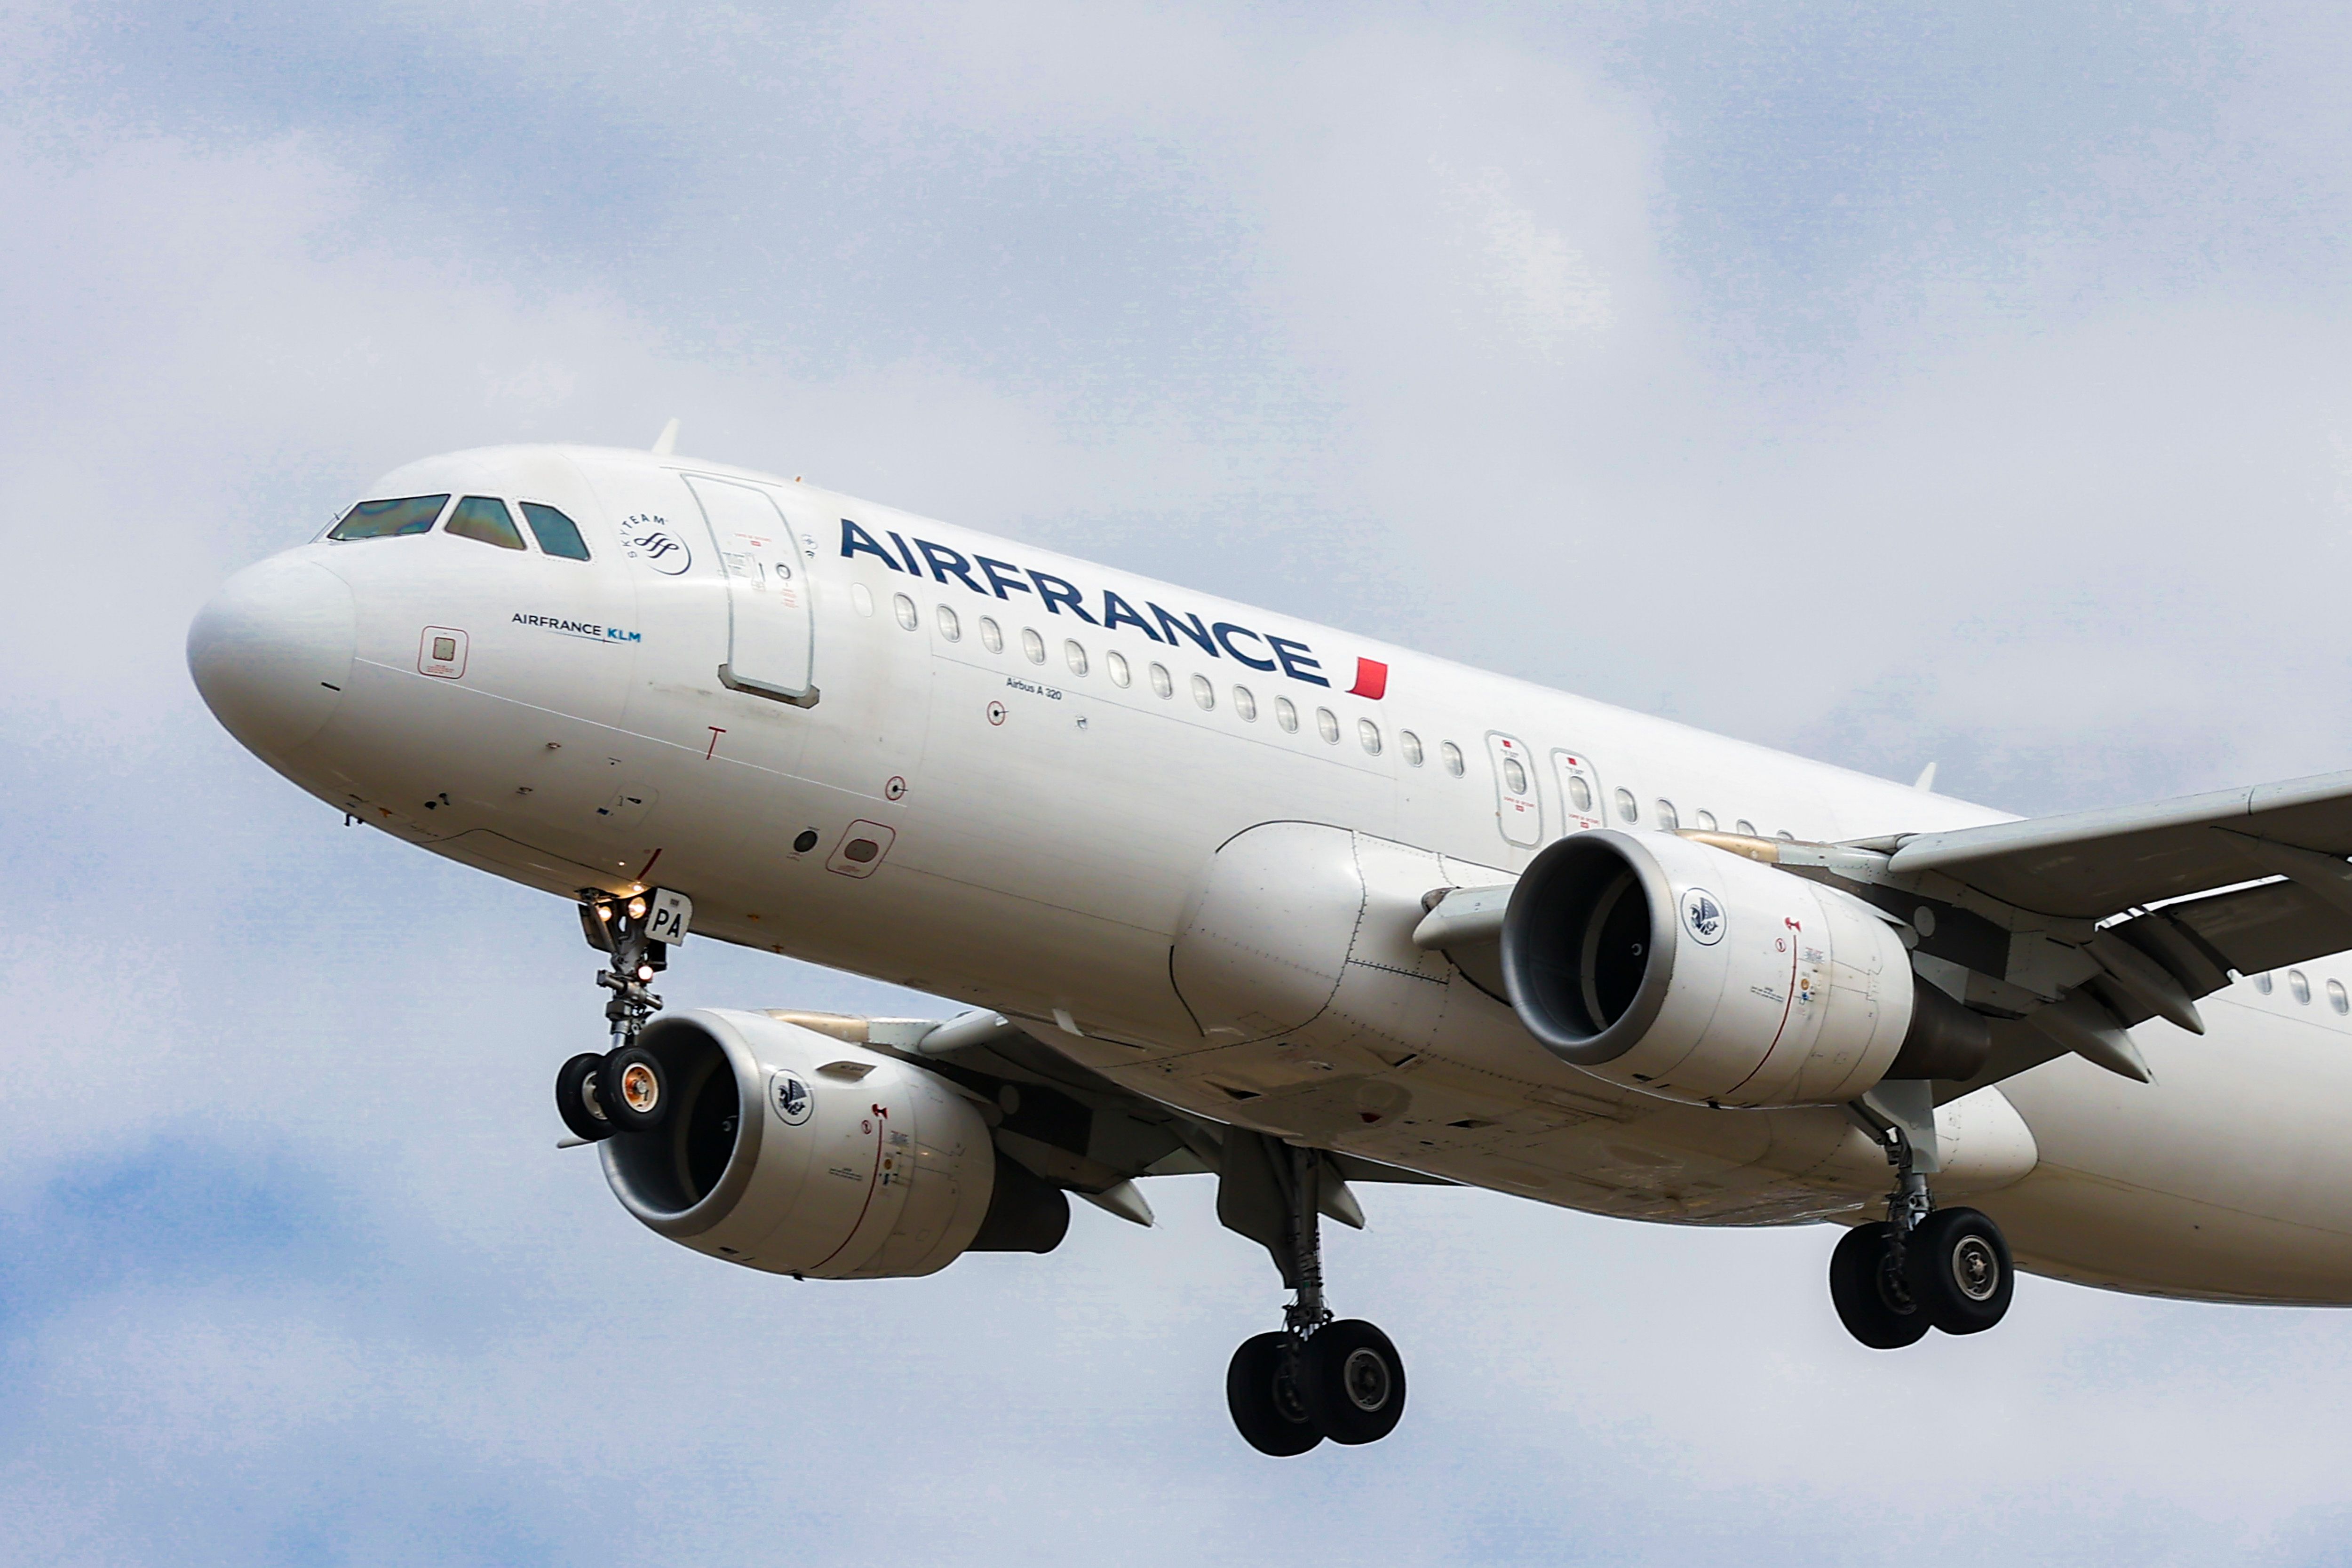 Air France Airbus A320 commercial aircraft as seen landing in London Heathrow Airport.